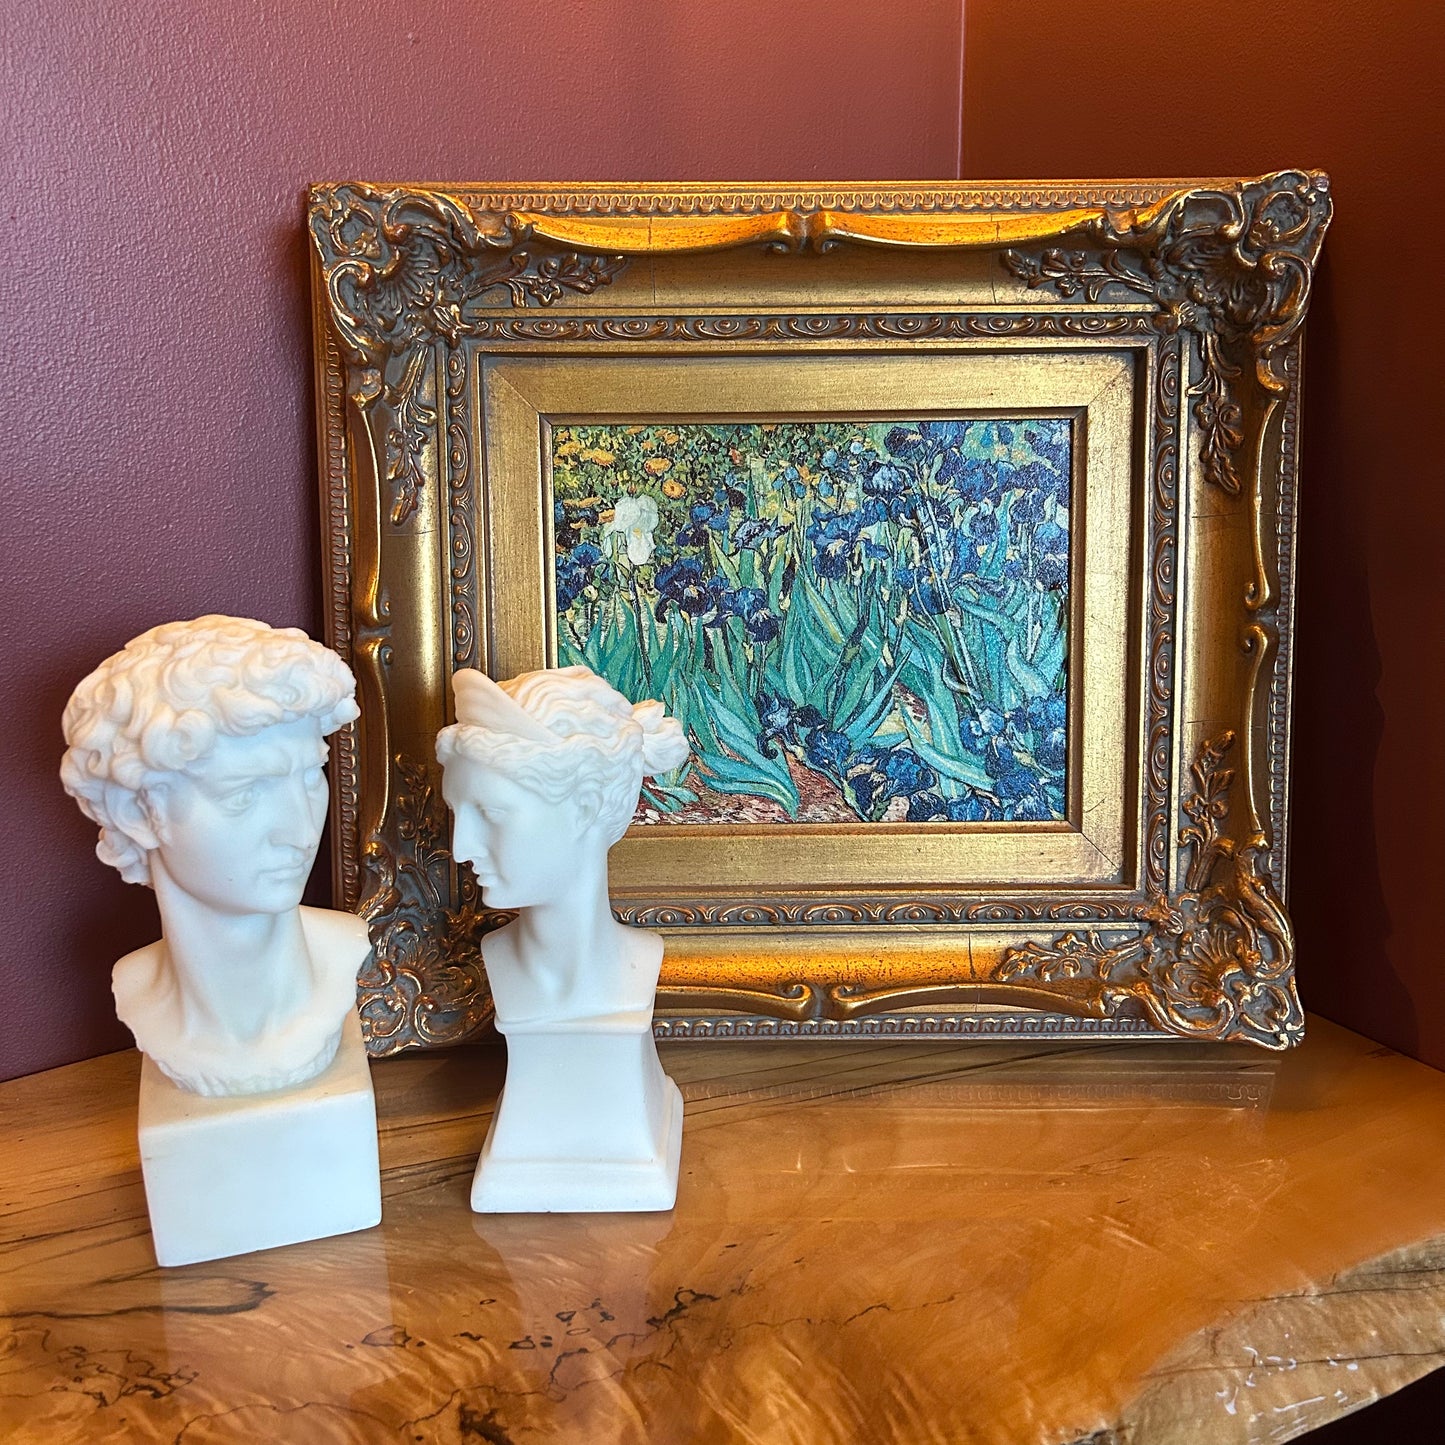 Van Gogh 'Irises' reproduction with gilded frame